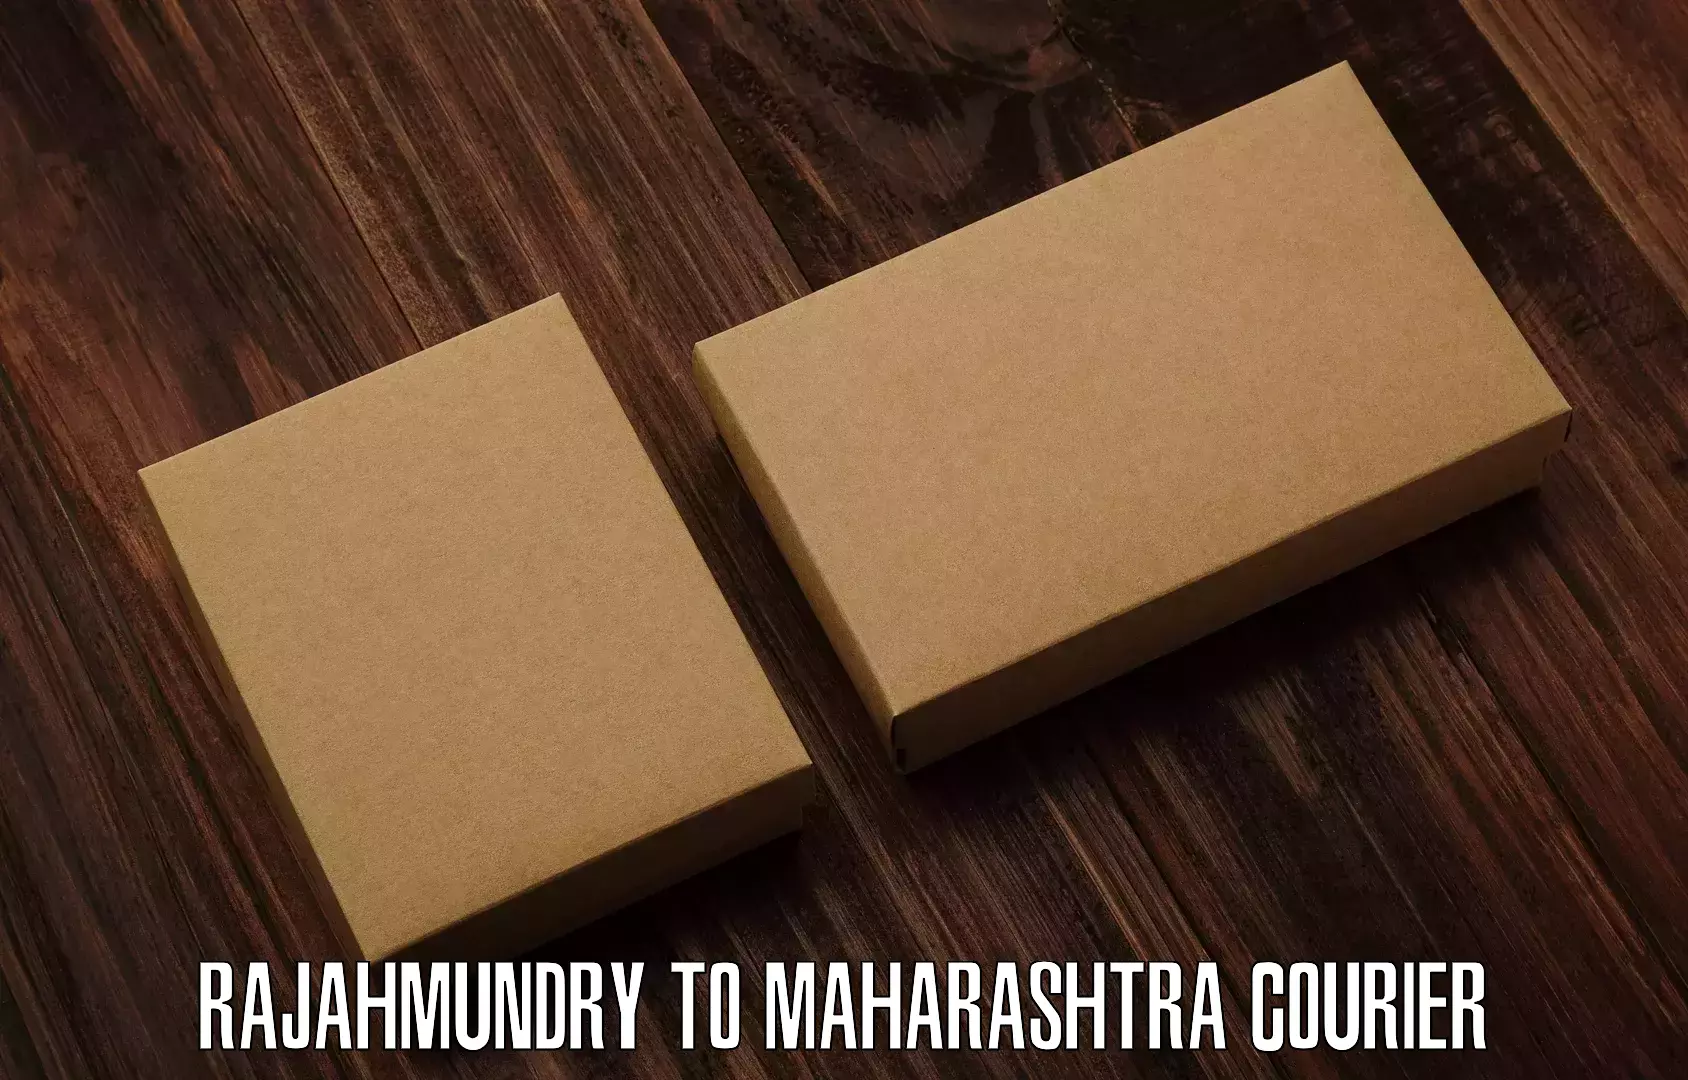 Courier service innovation Rajahmundry to Greater Thane